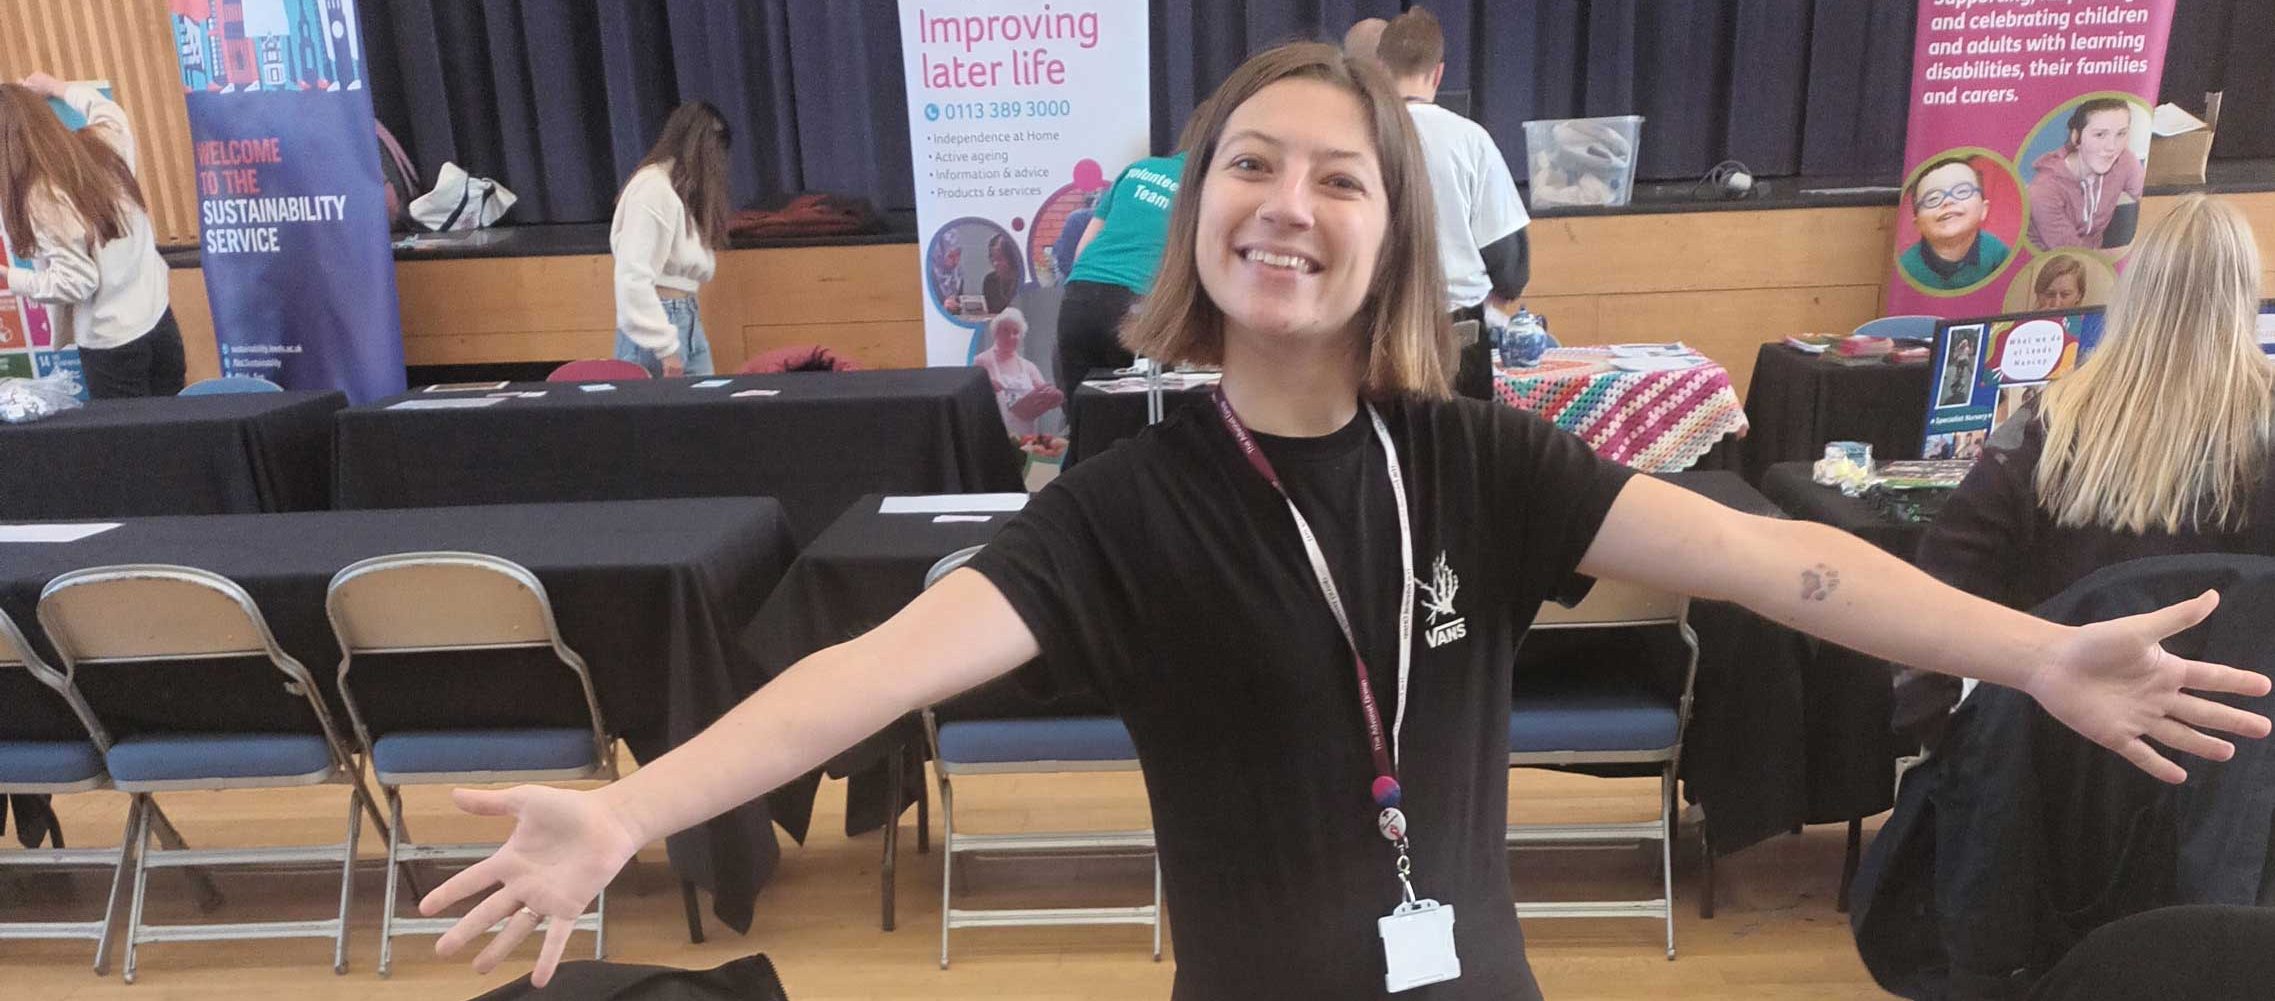 A photo of Beth, Leeds Autism AIM's Volunteer Coordinator, at a stall for a volunteering event. They have their arms outstretched. They are also smiling.